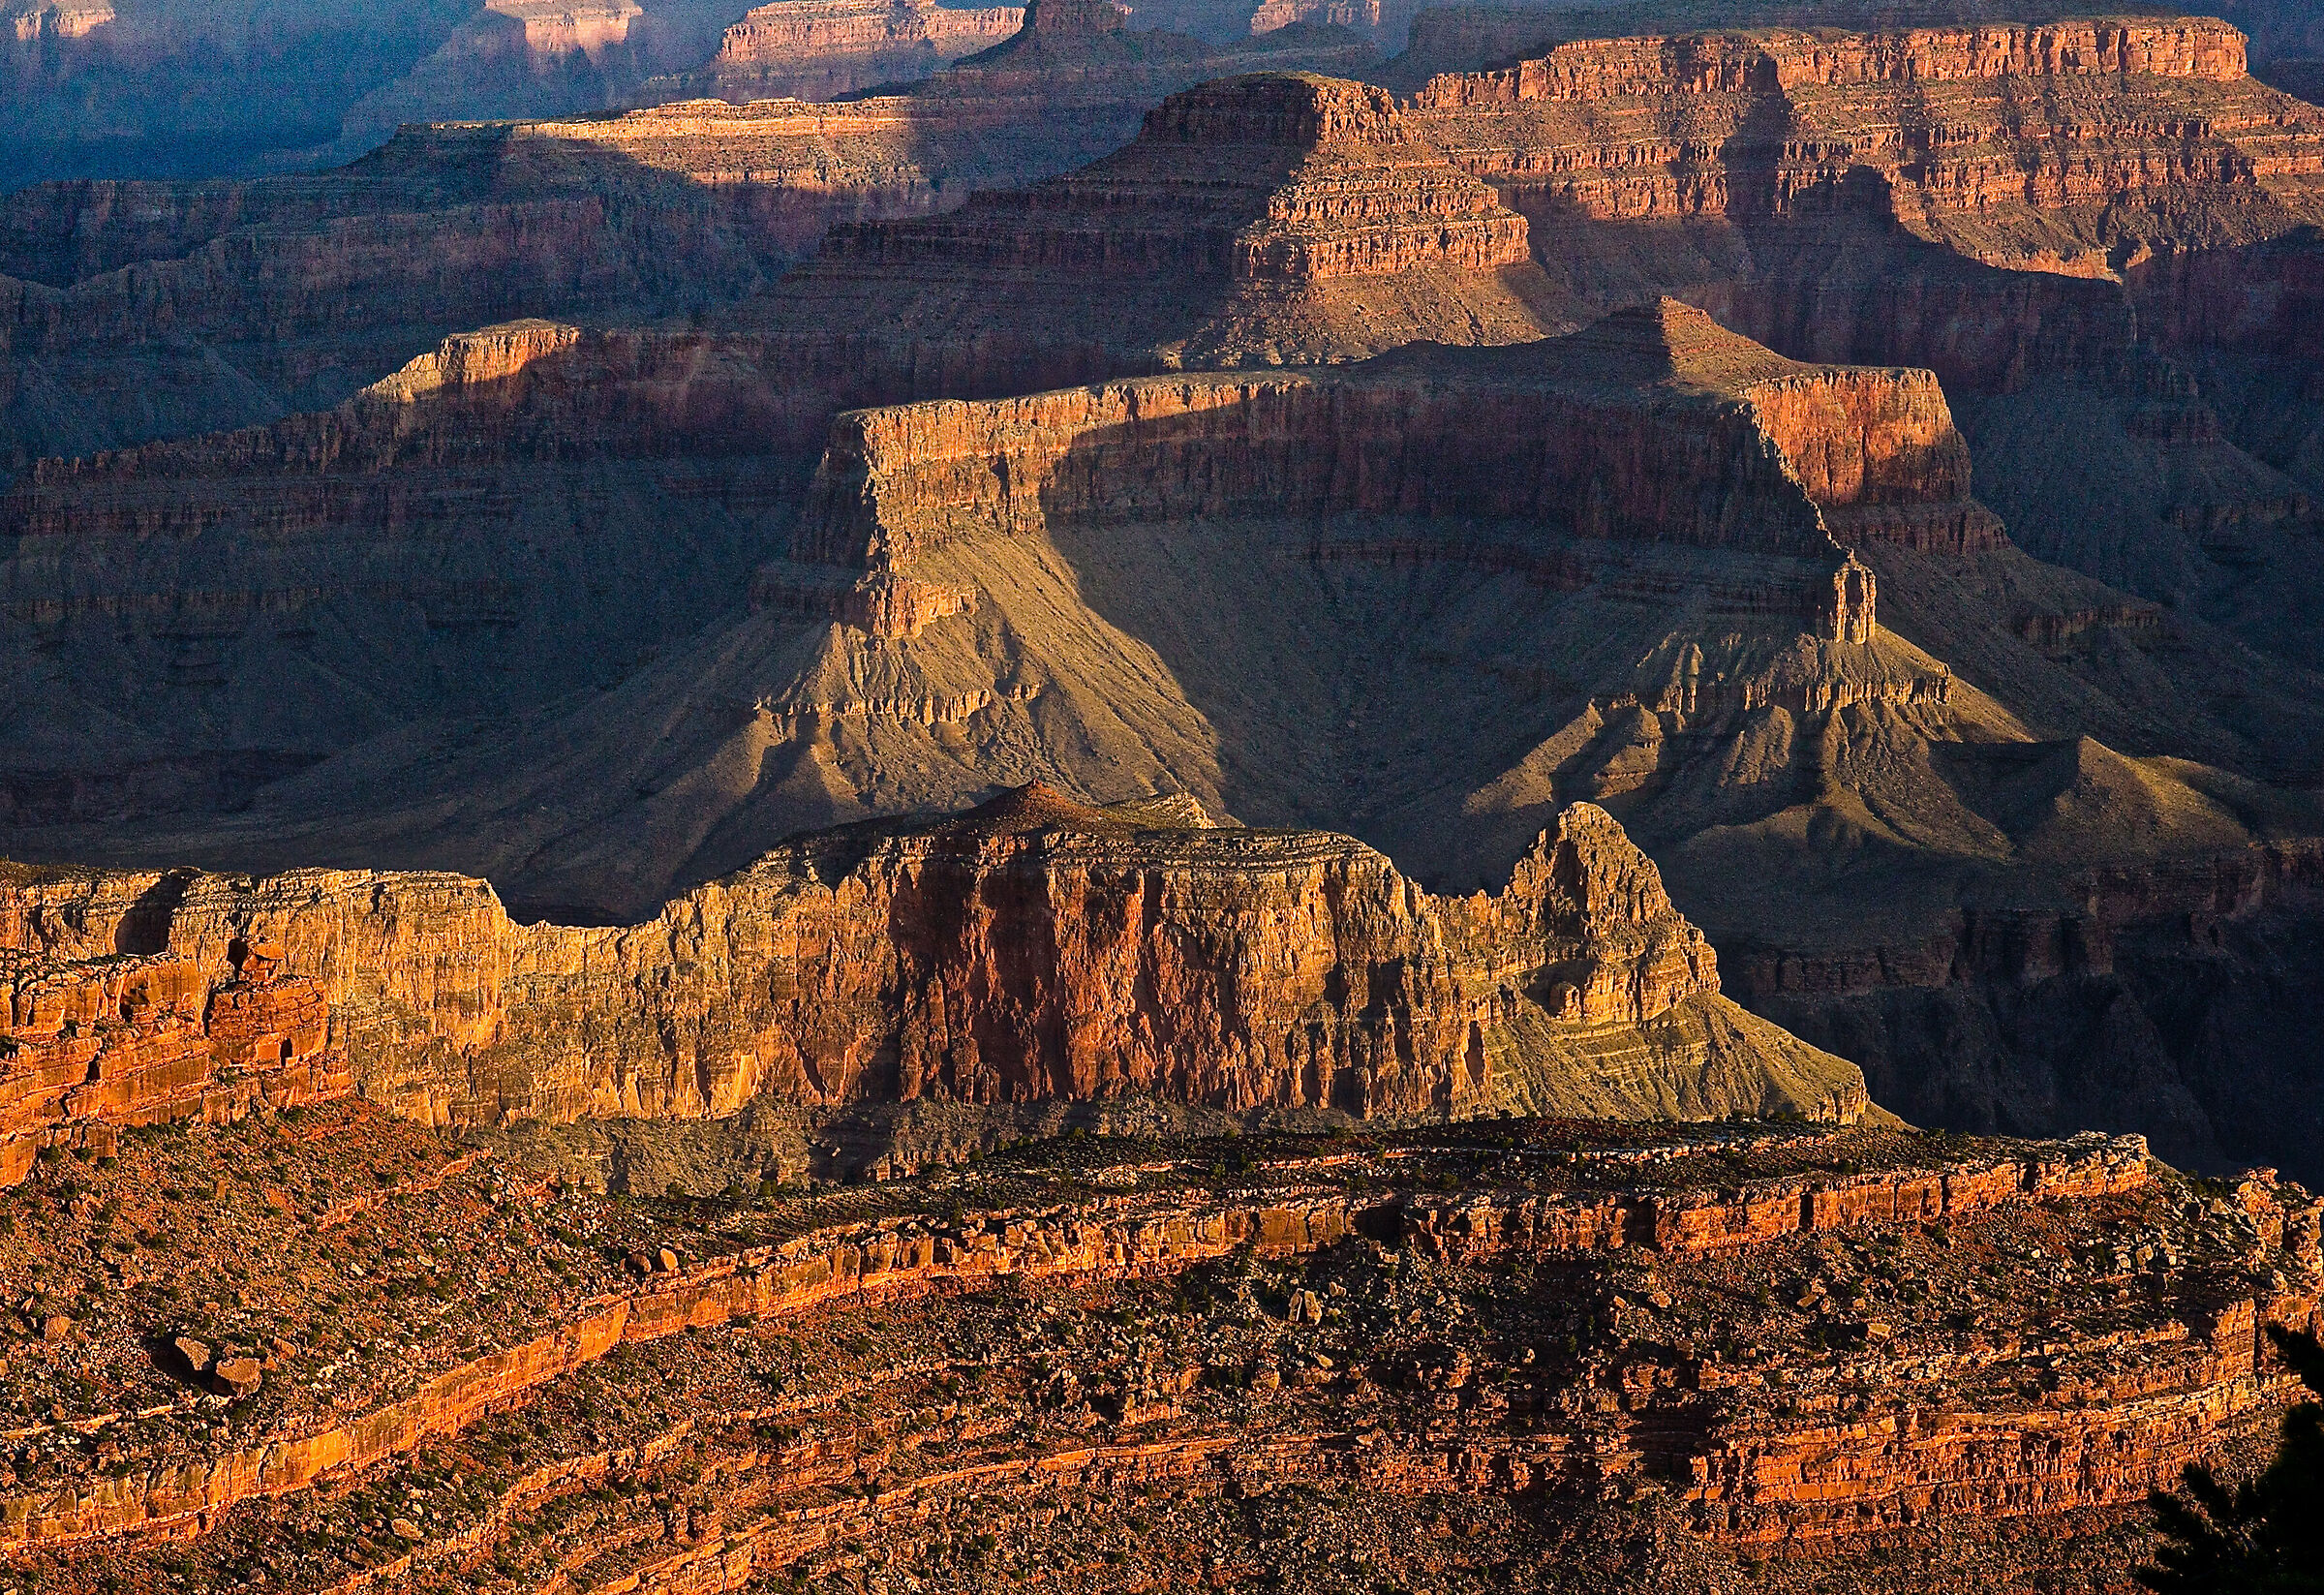 Sunrise over the Grand Canyon...